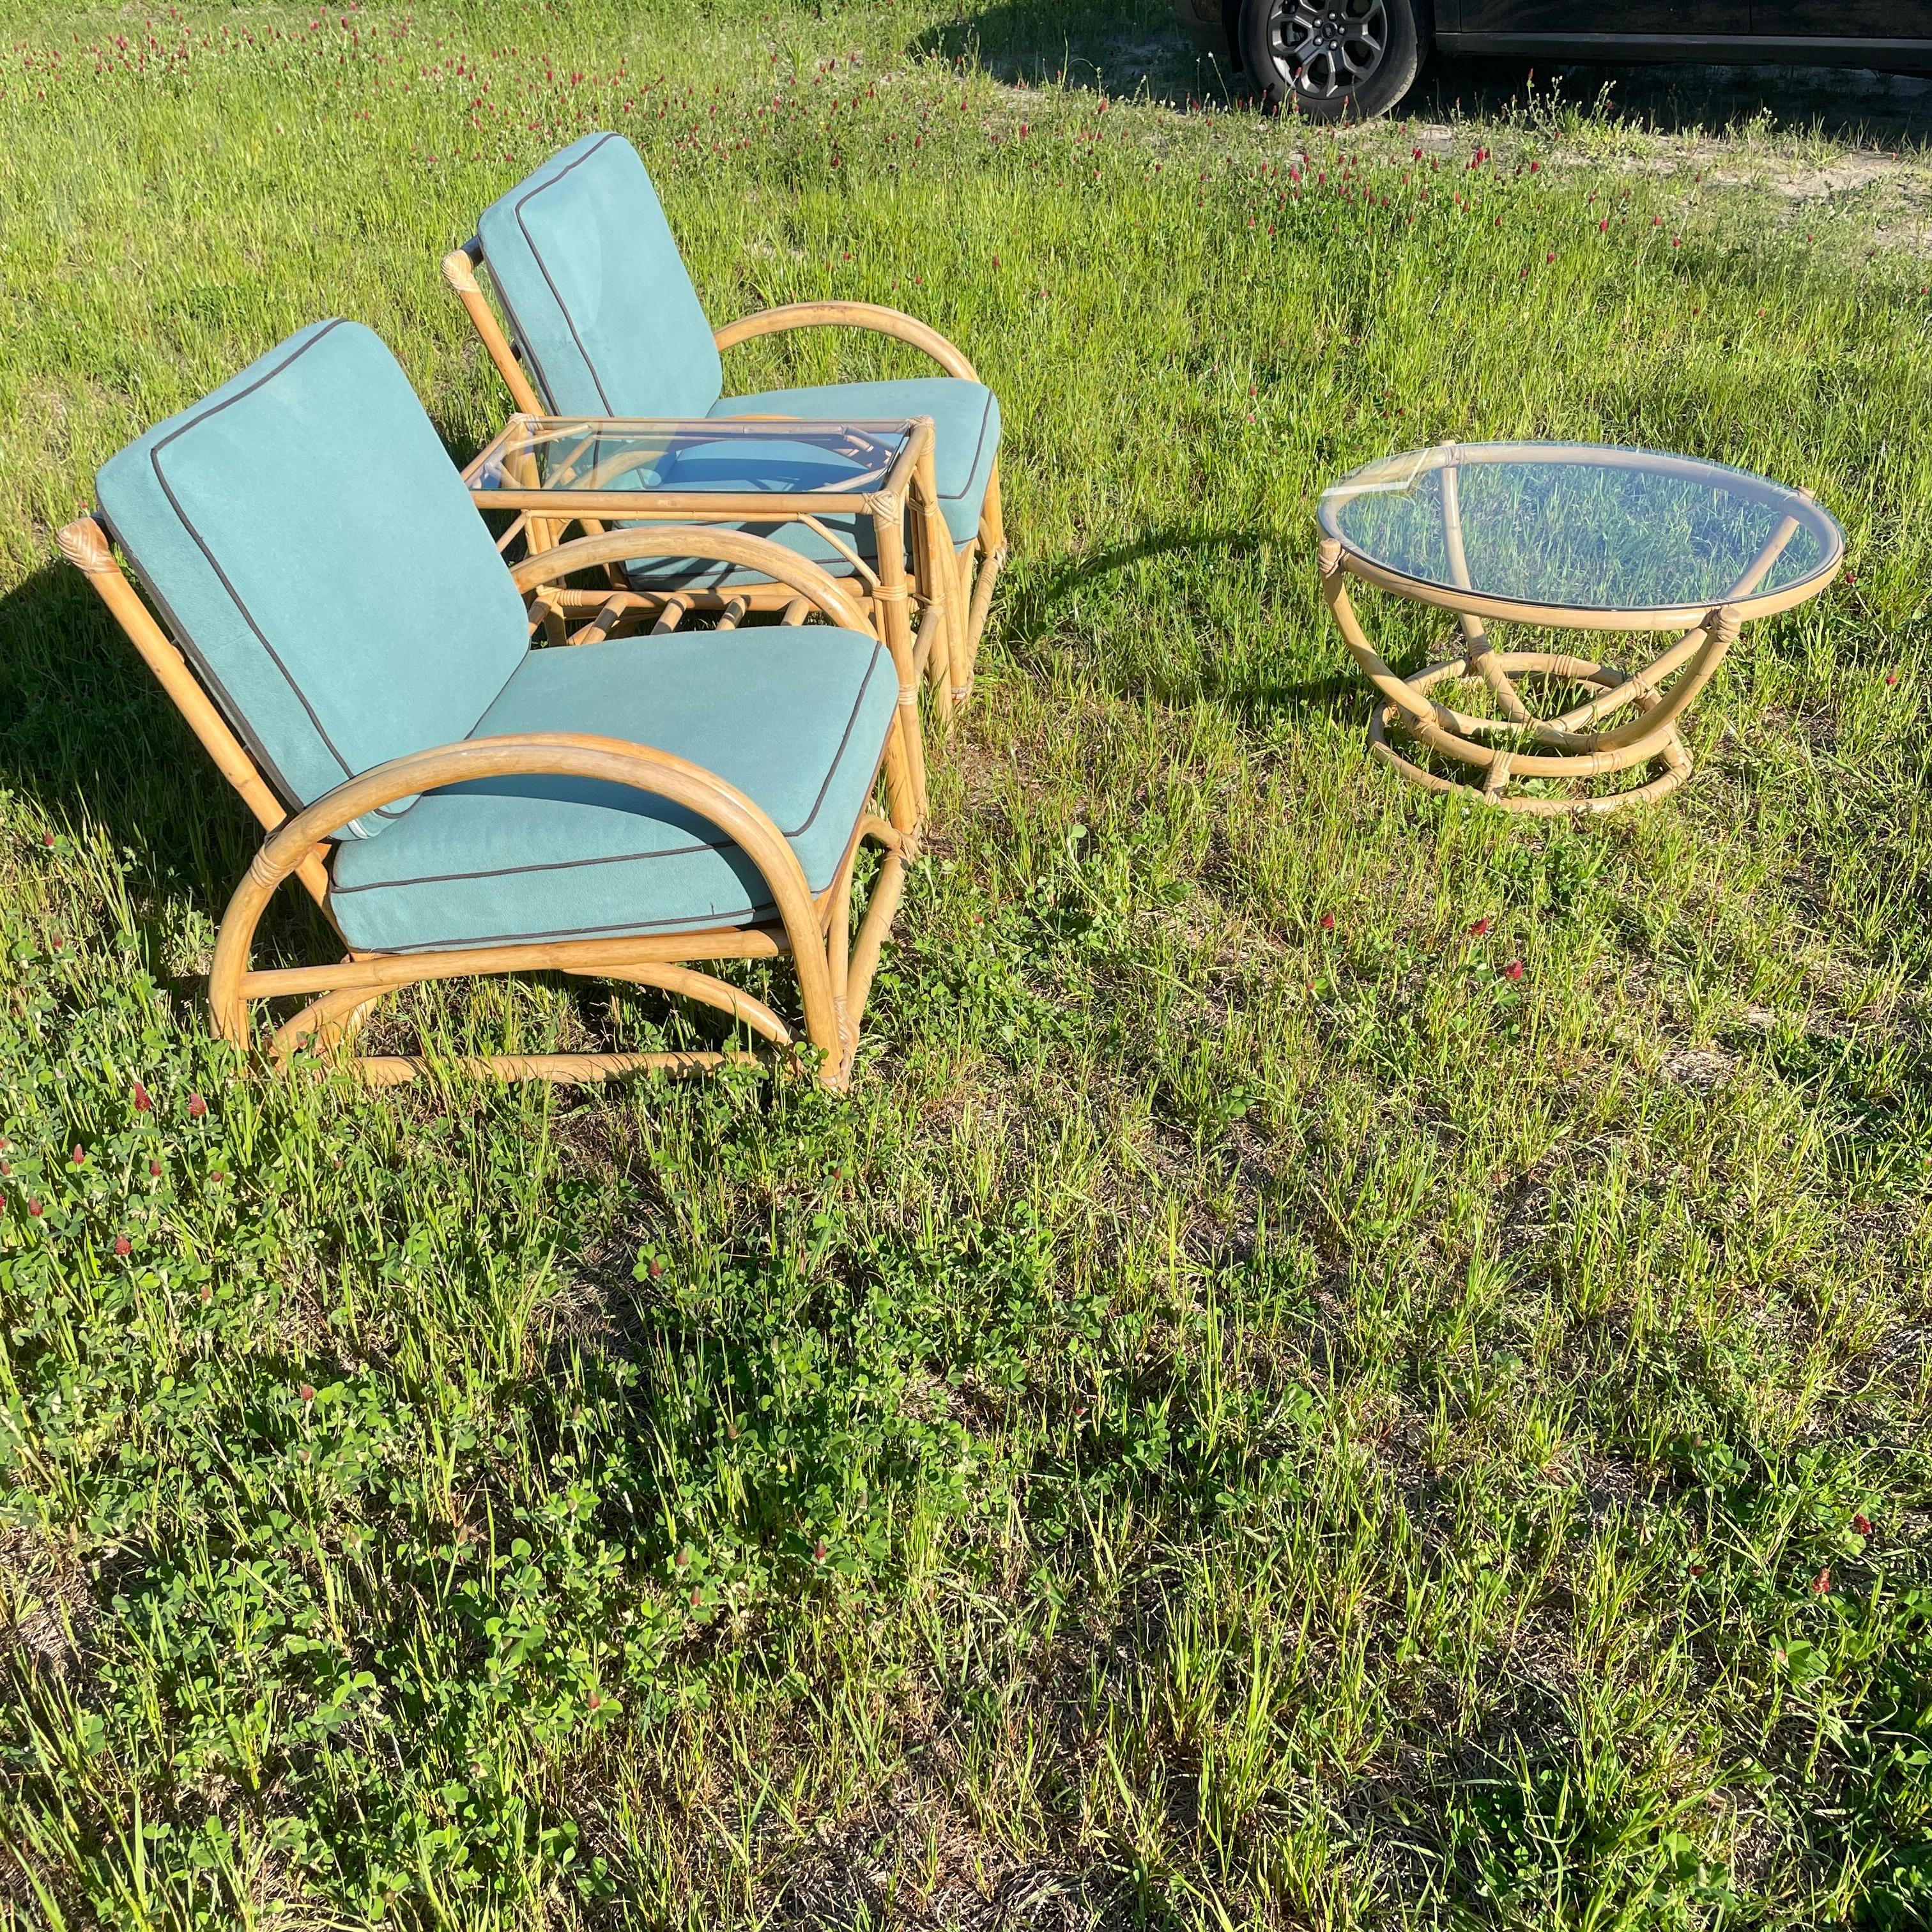 Paul Frankl style four piece rattan patio furniture set, which includes two comfortable arm chairs and two glass top tables. One table being a round glass top coffee table and the second being a glass top side table with a shelf underneath. All of